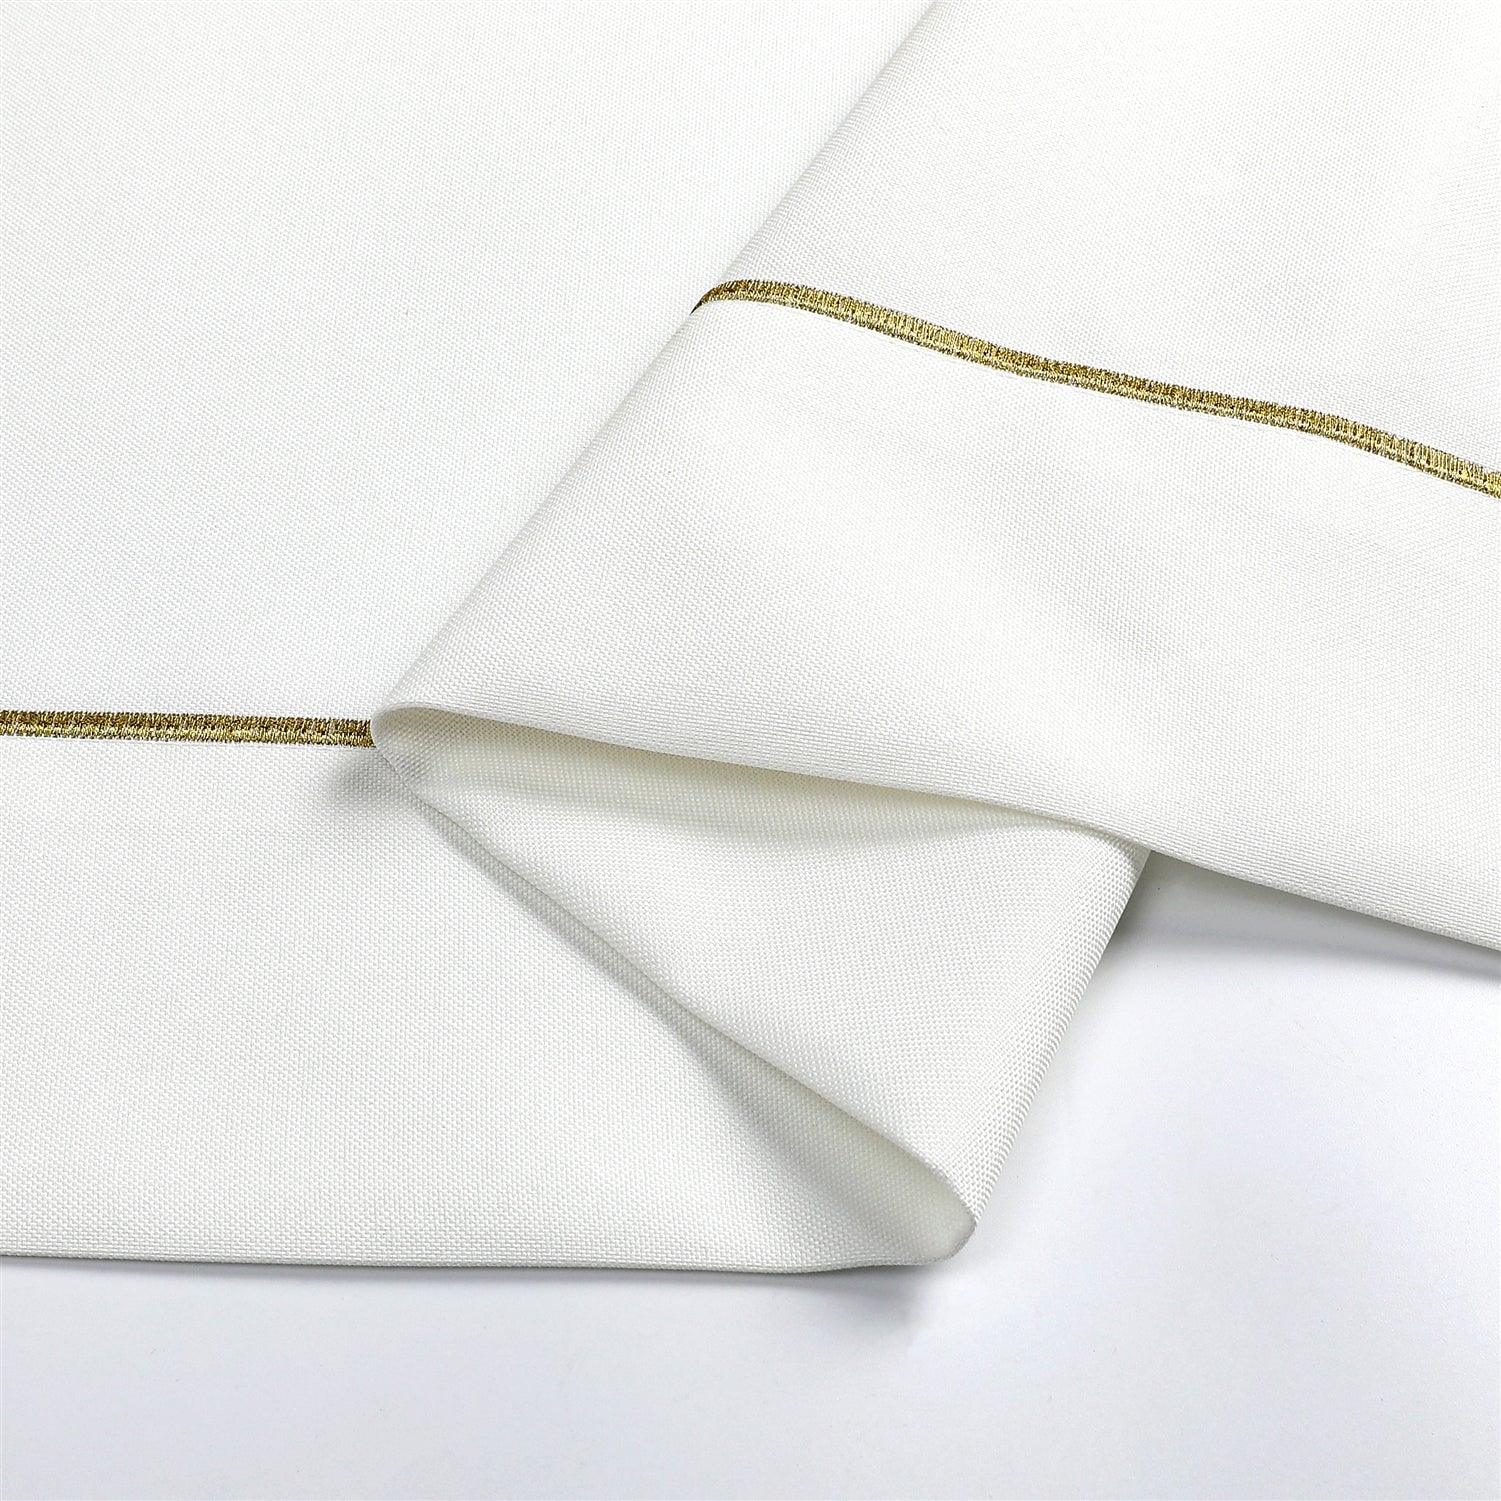 Tablecloth Polyester (Linen Look) TC1553 - White Gold Trim design Etched at seam - Elegant Linen